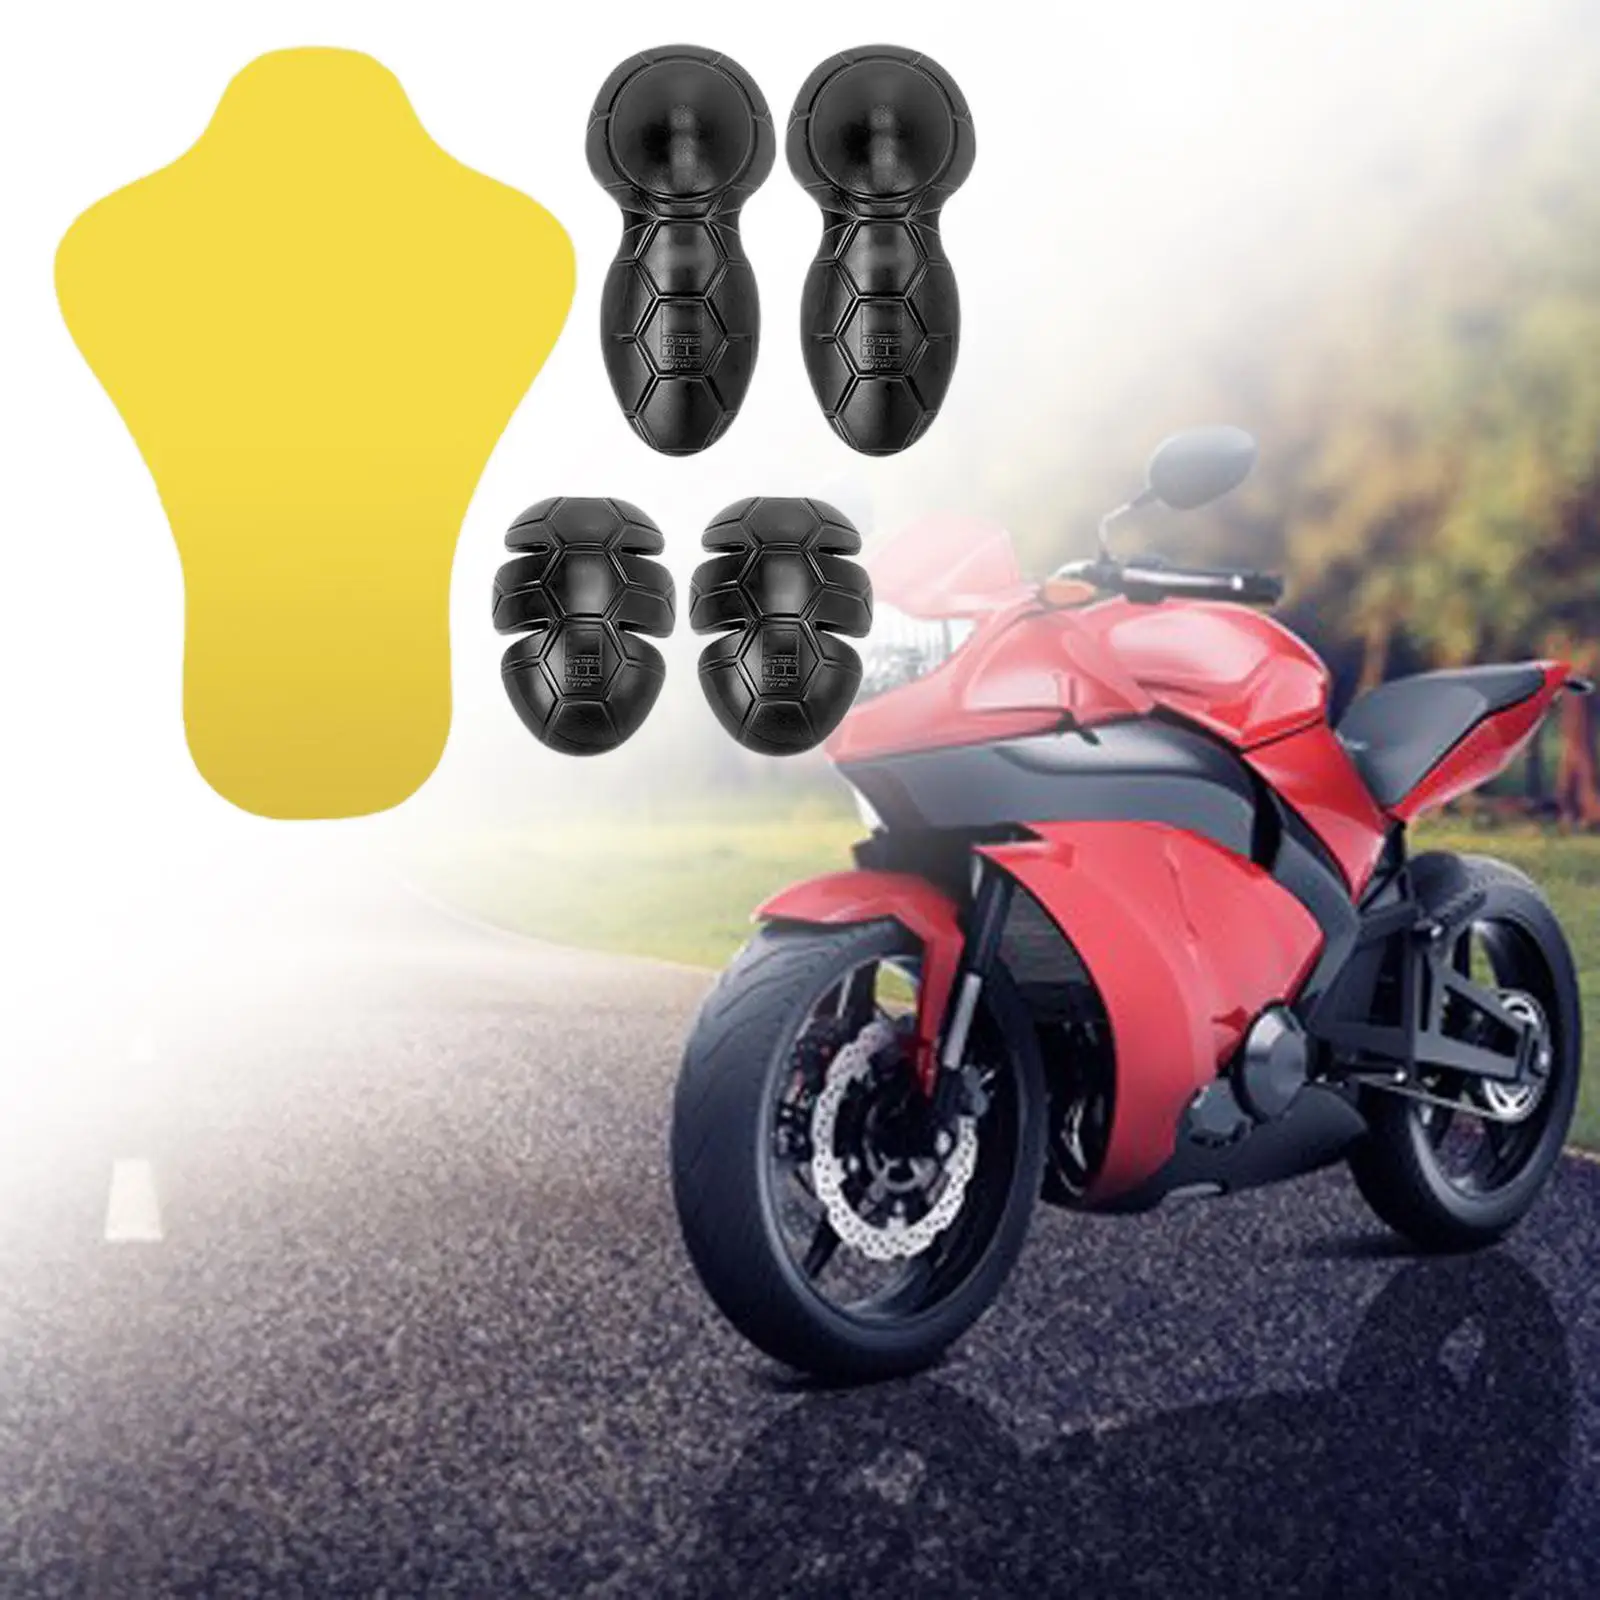 5 Pieces Motorcycle Jacket Insert Armor Protectors Set Protective Gear Back Chest Guard